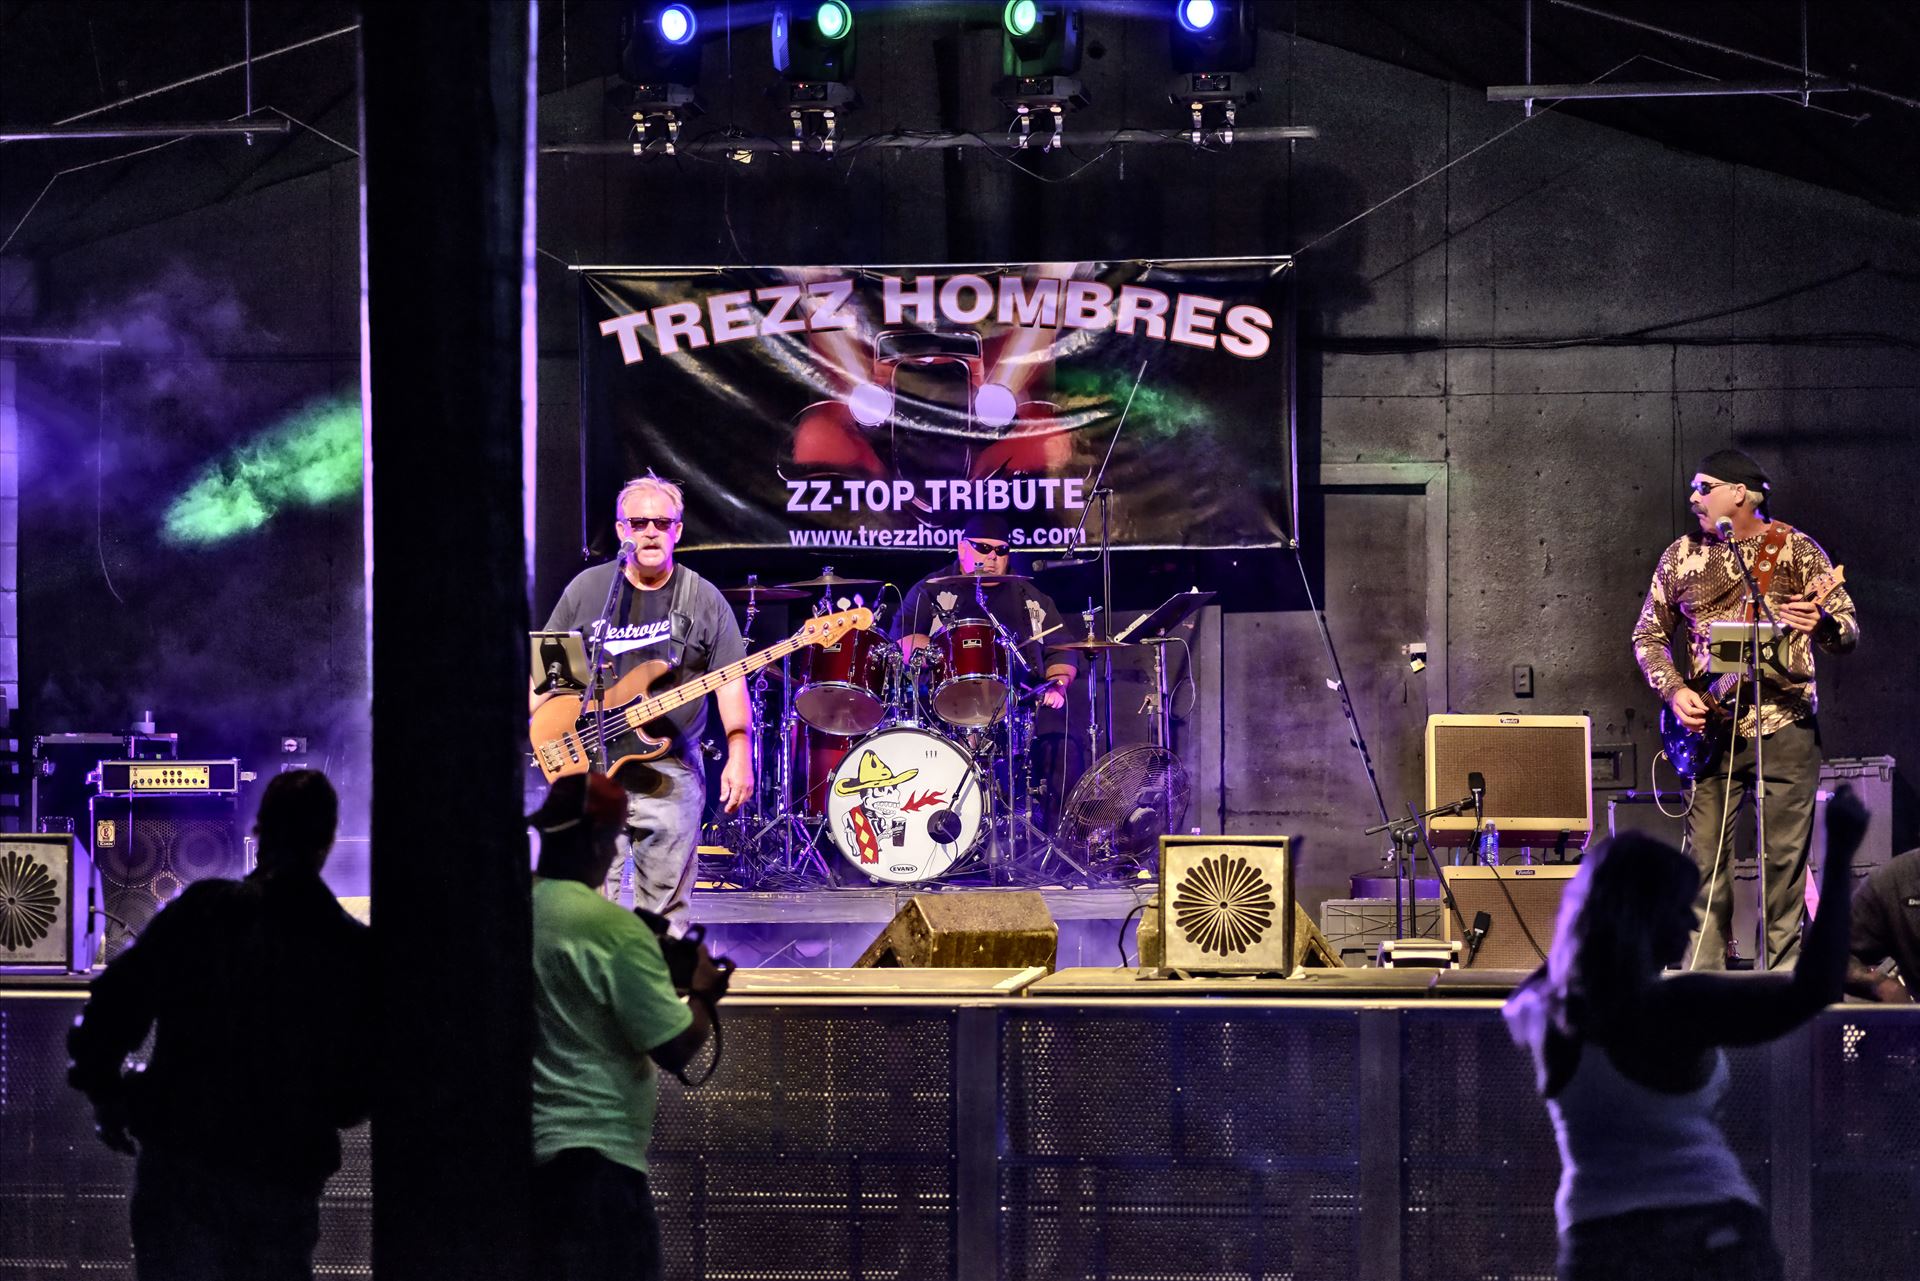 Trezz Hombres at Club Lavela RAW_2352.jpg  by Terry Kelly Photography